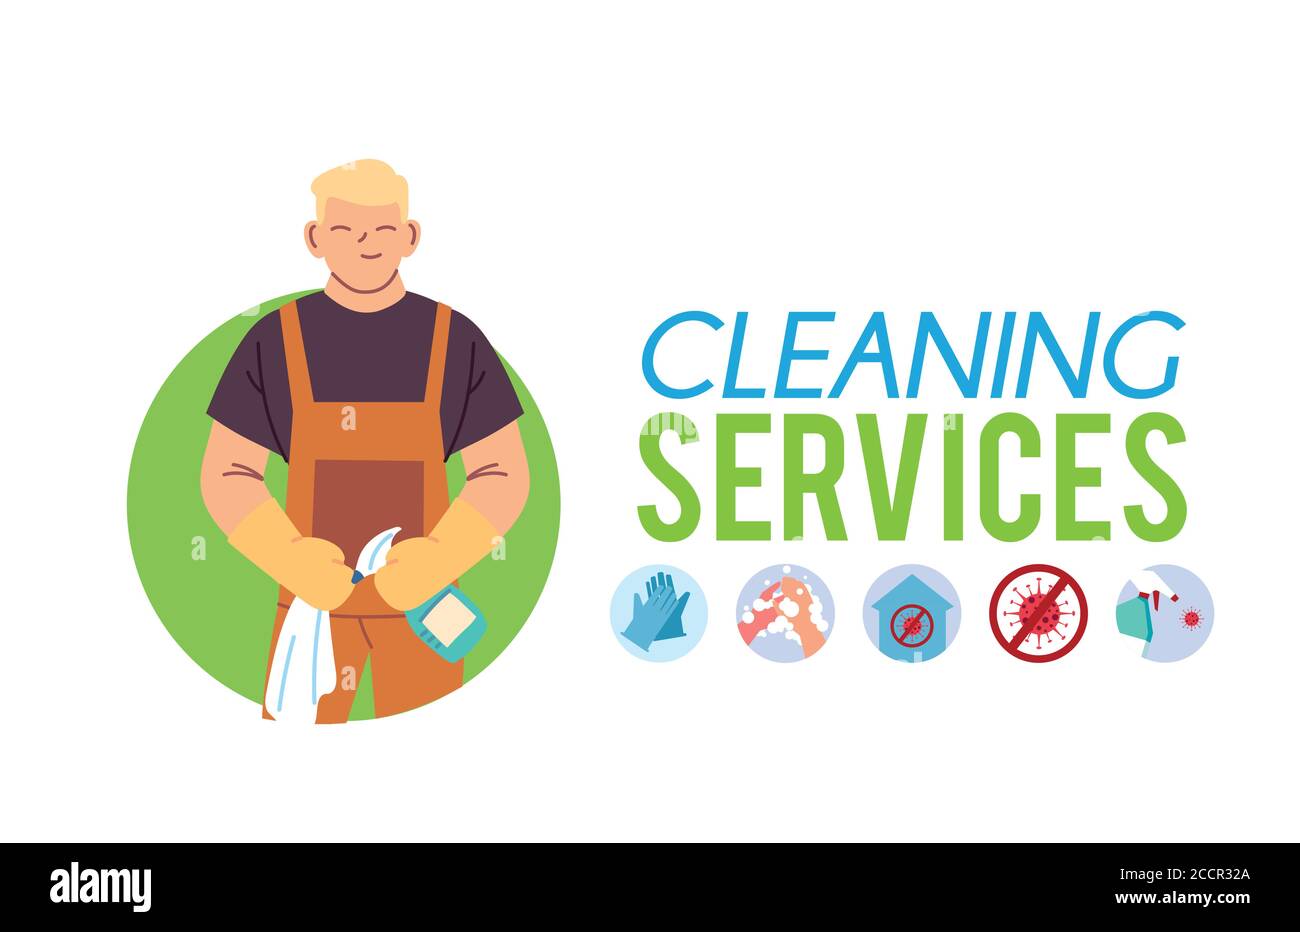 young man with apron and gloves for washing and cleaning vector illustration desing Stock Vector